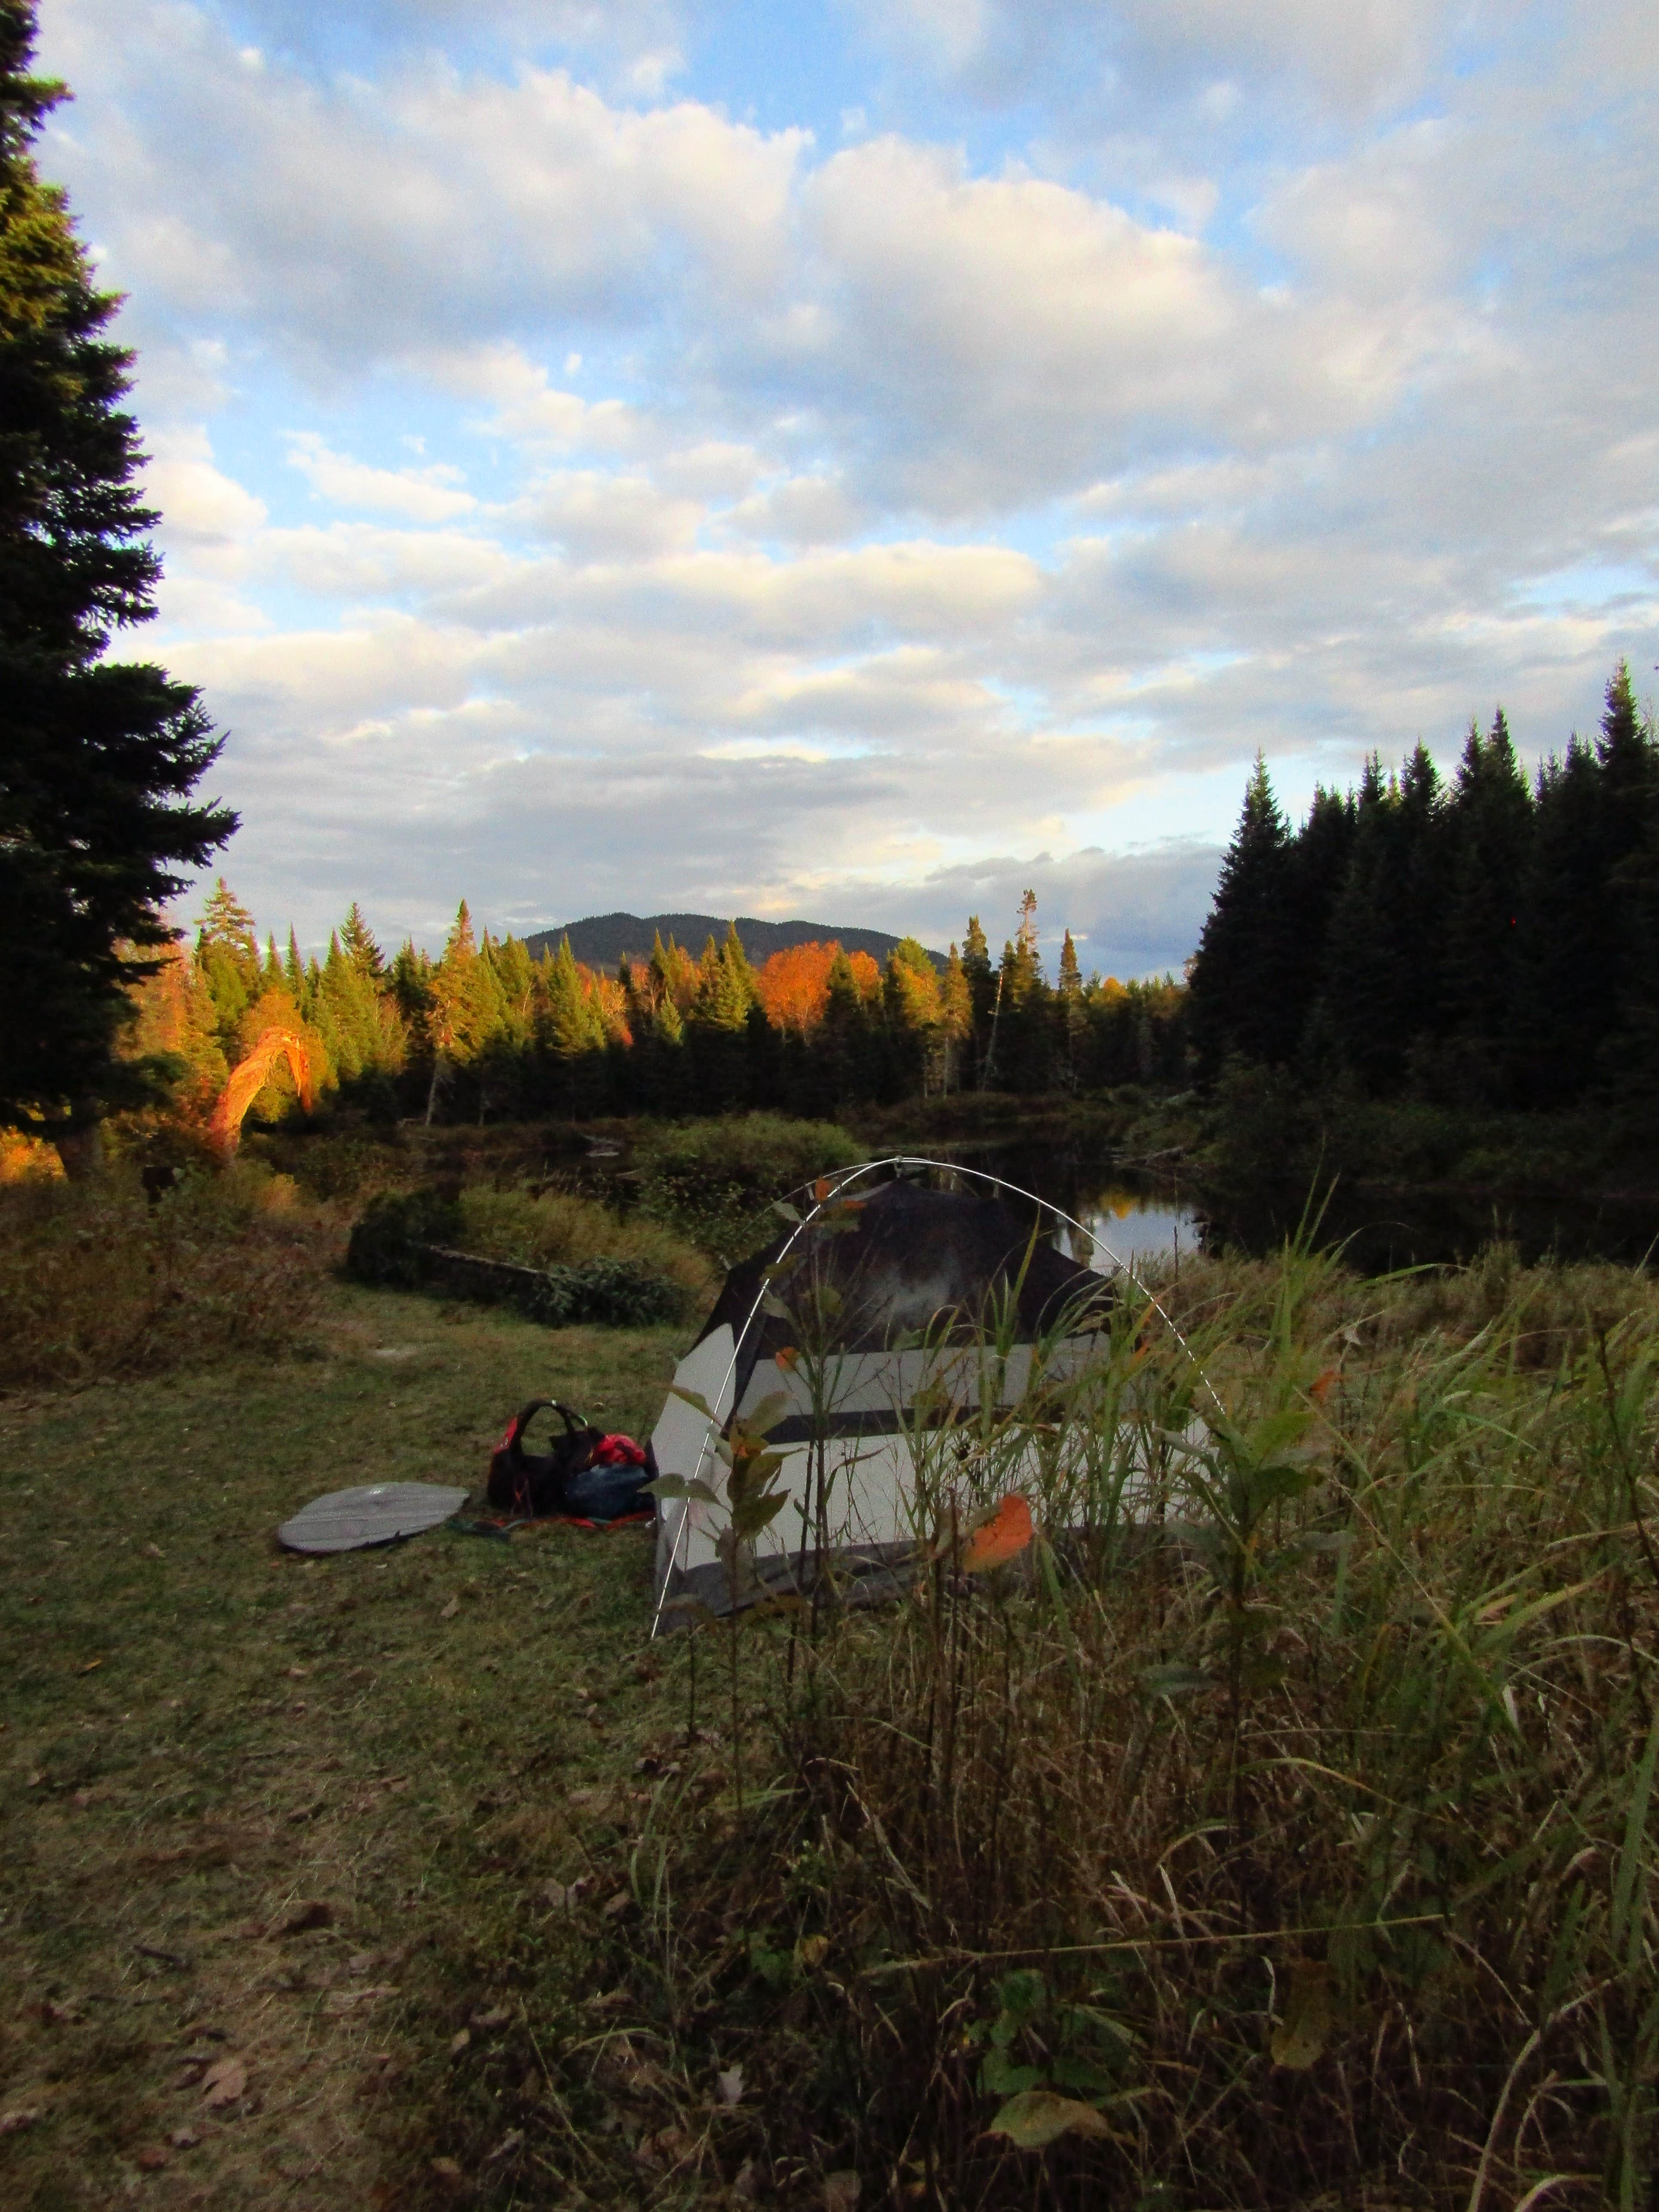 Camper submitted image from Attean Falls - 3